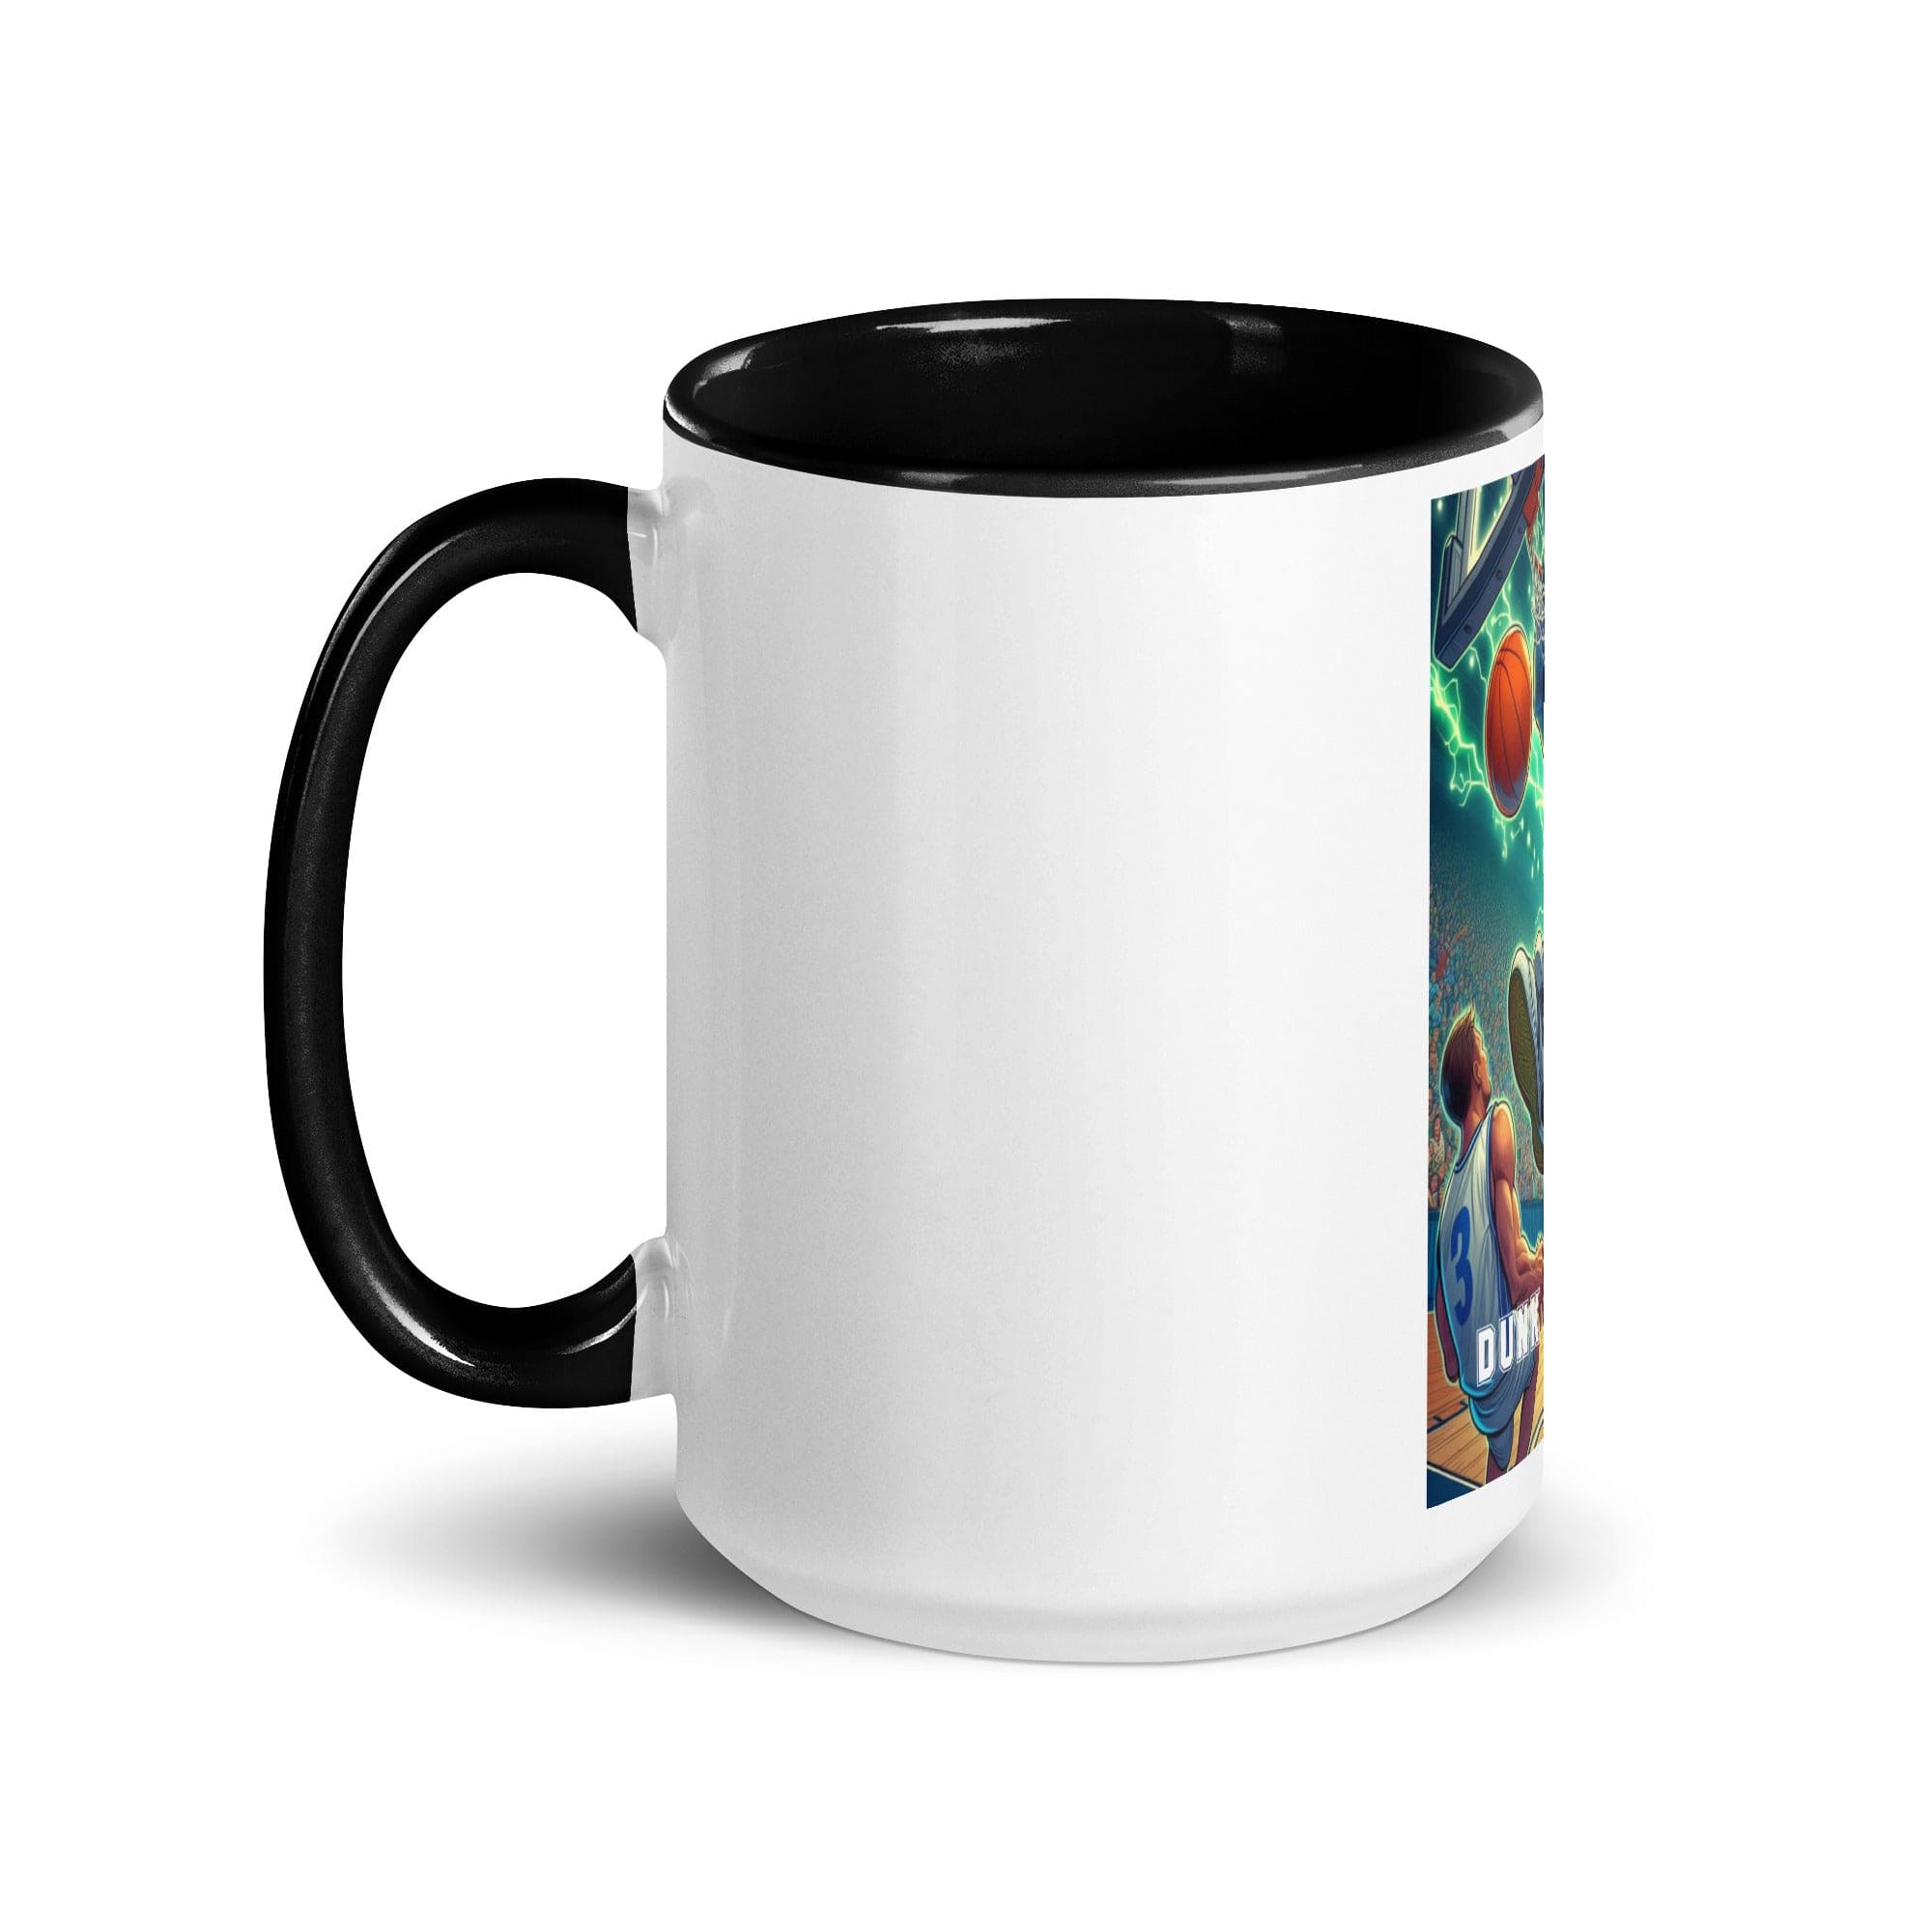 Interior Accented Mugs for Every Sip